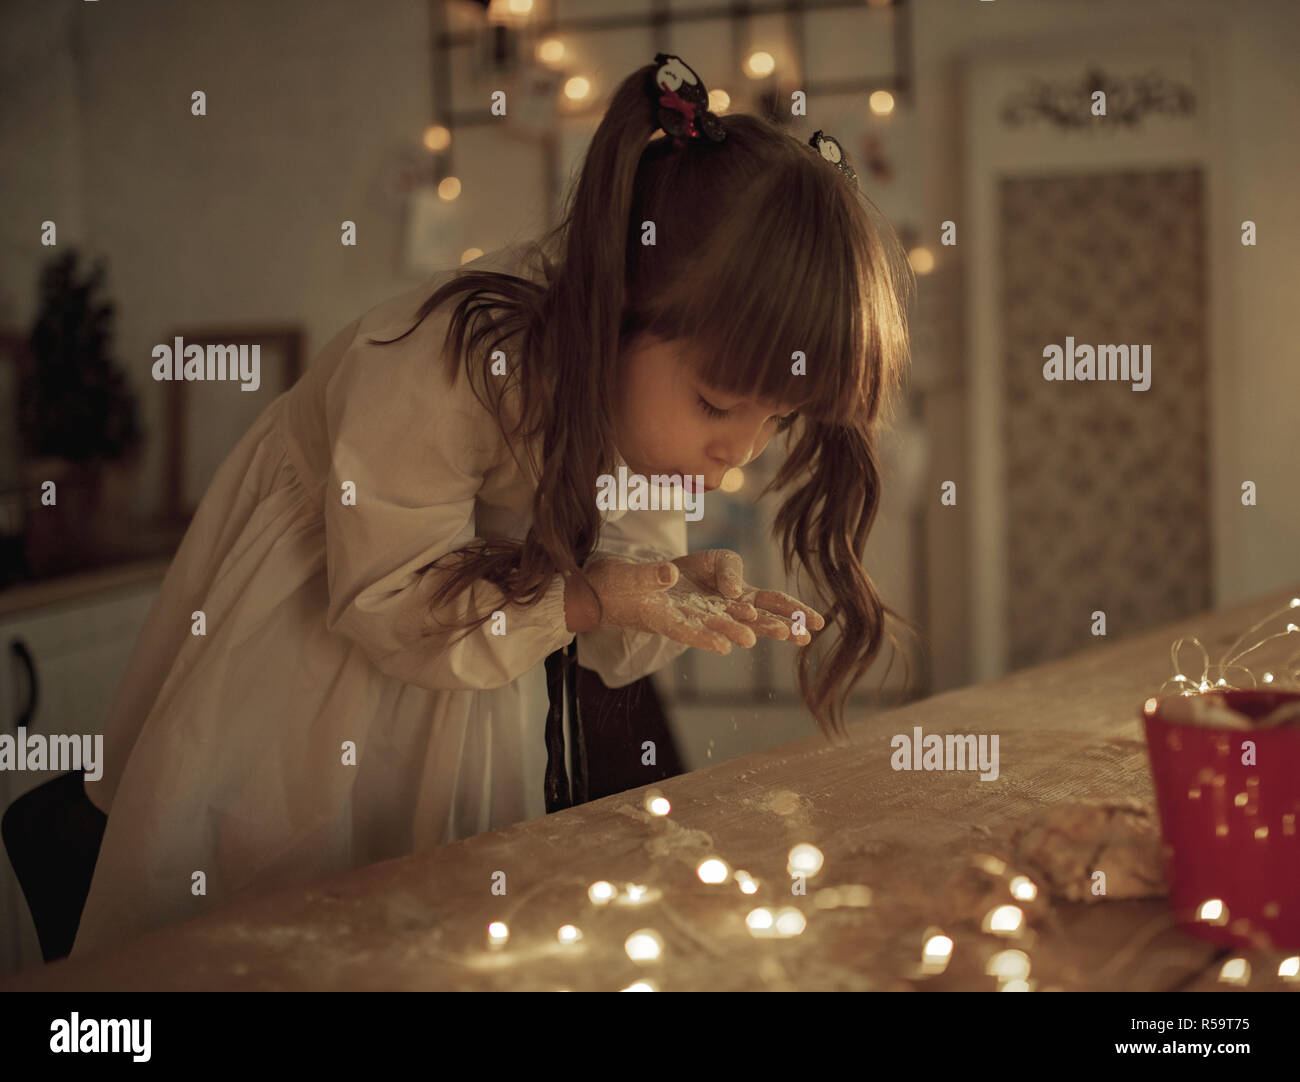 Child girl sprinkles flour on the table and blows on her stained hands on background of garland from light bulbs. Stock Photo